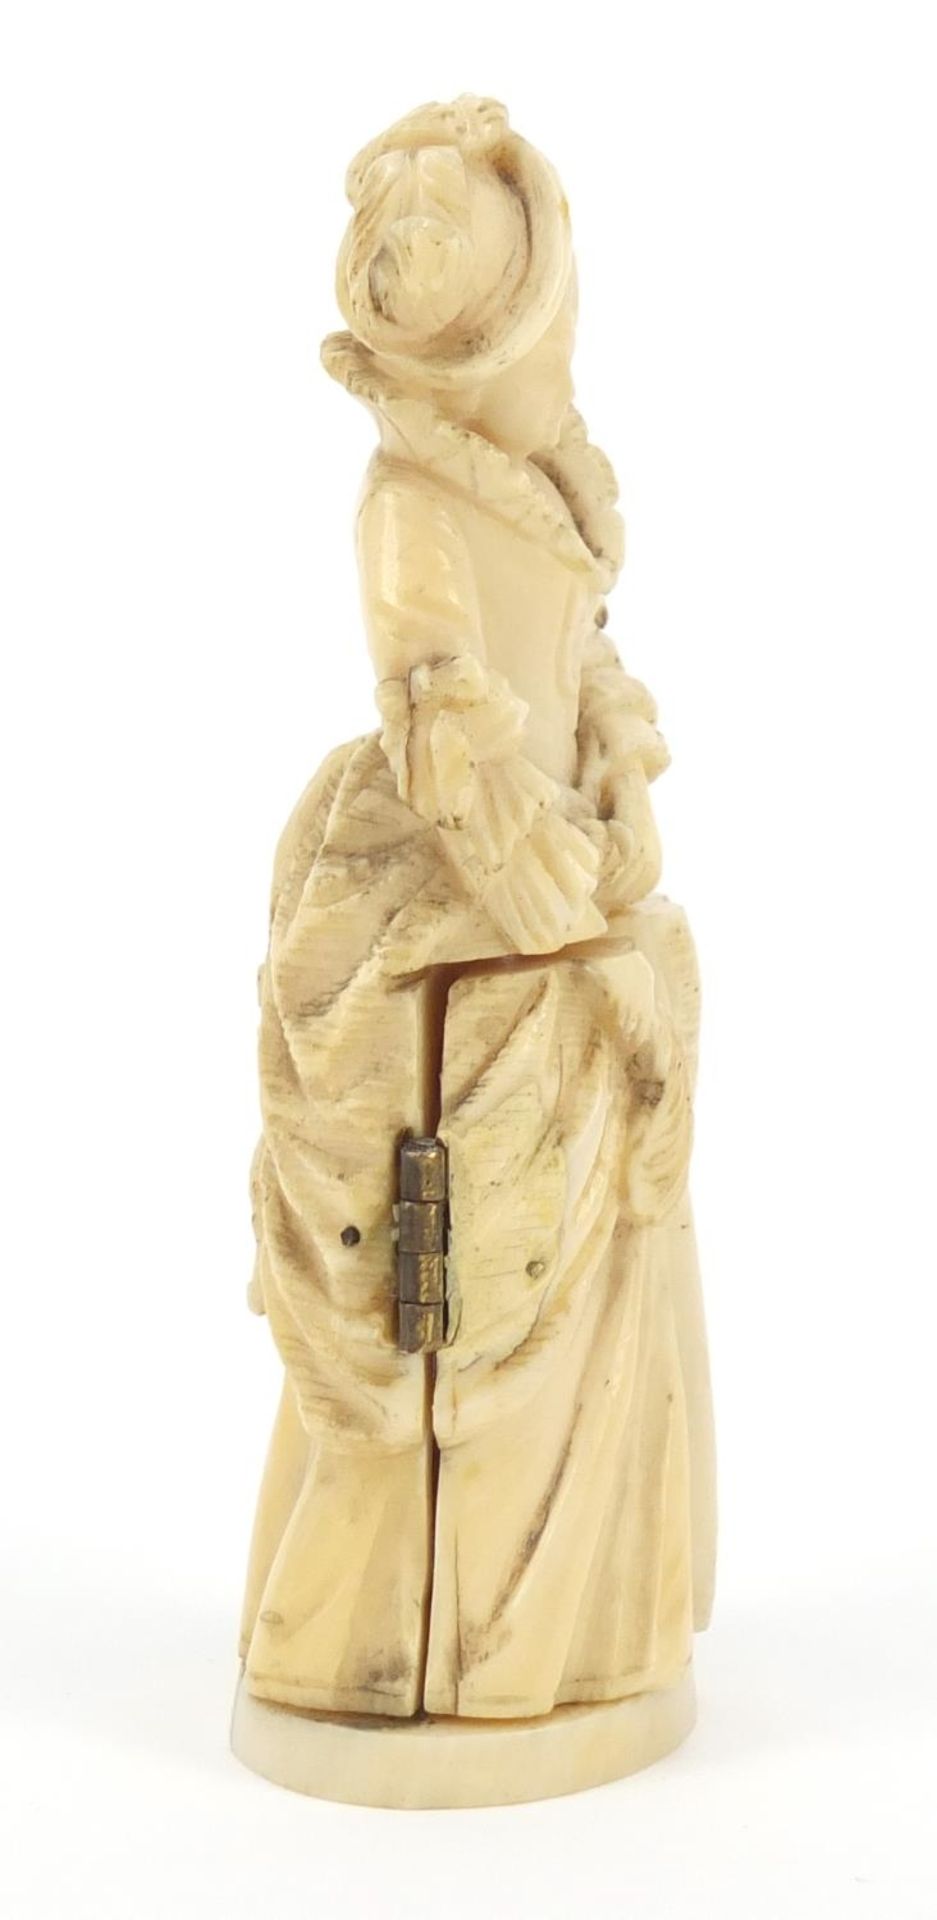 19th century French Dieppe carved ivory tryptych figure, 9cm high - Image 7 of 9